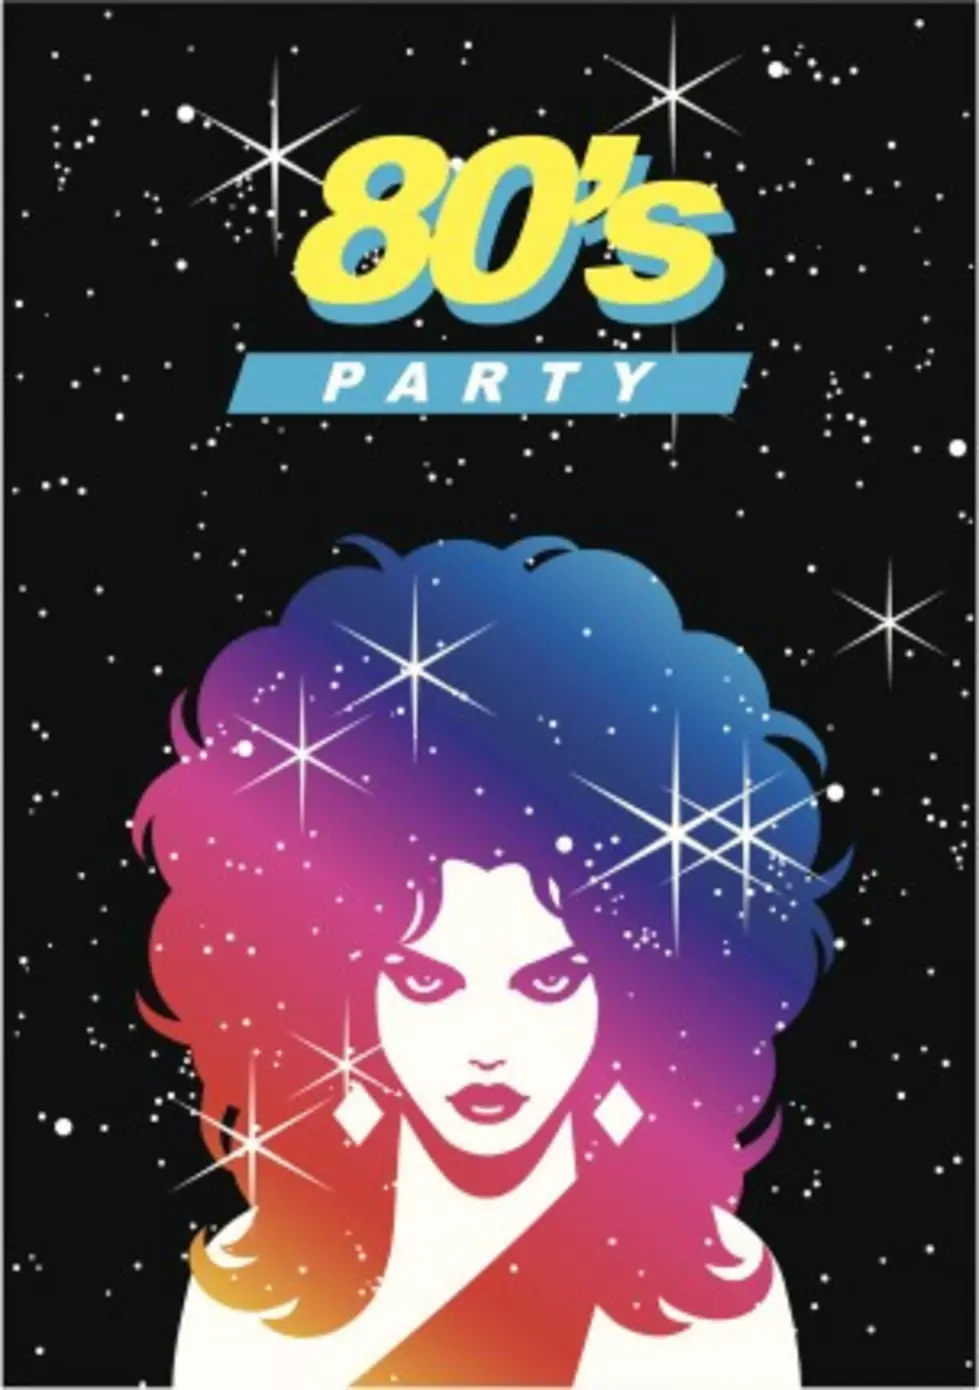 Get Ready For An 80’s Party With US1031